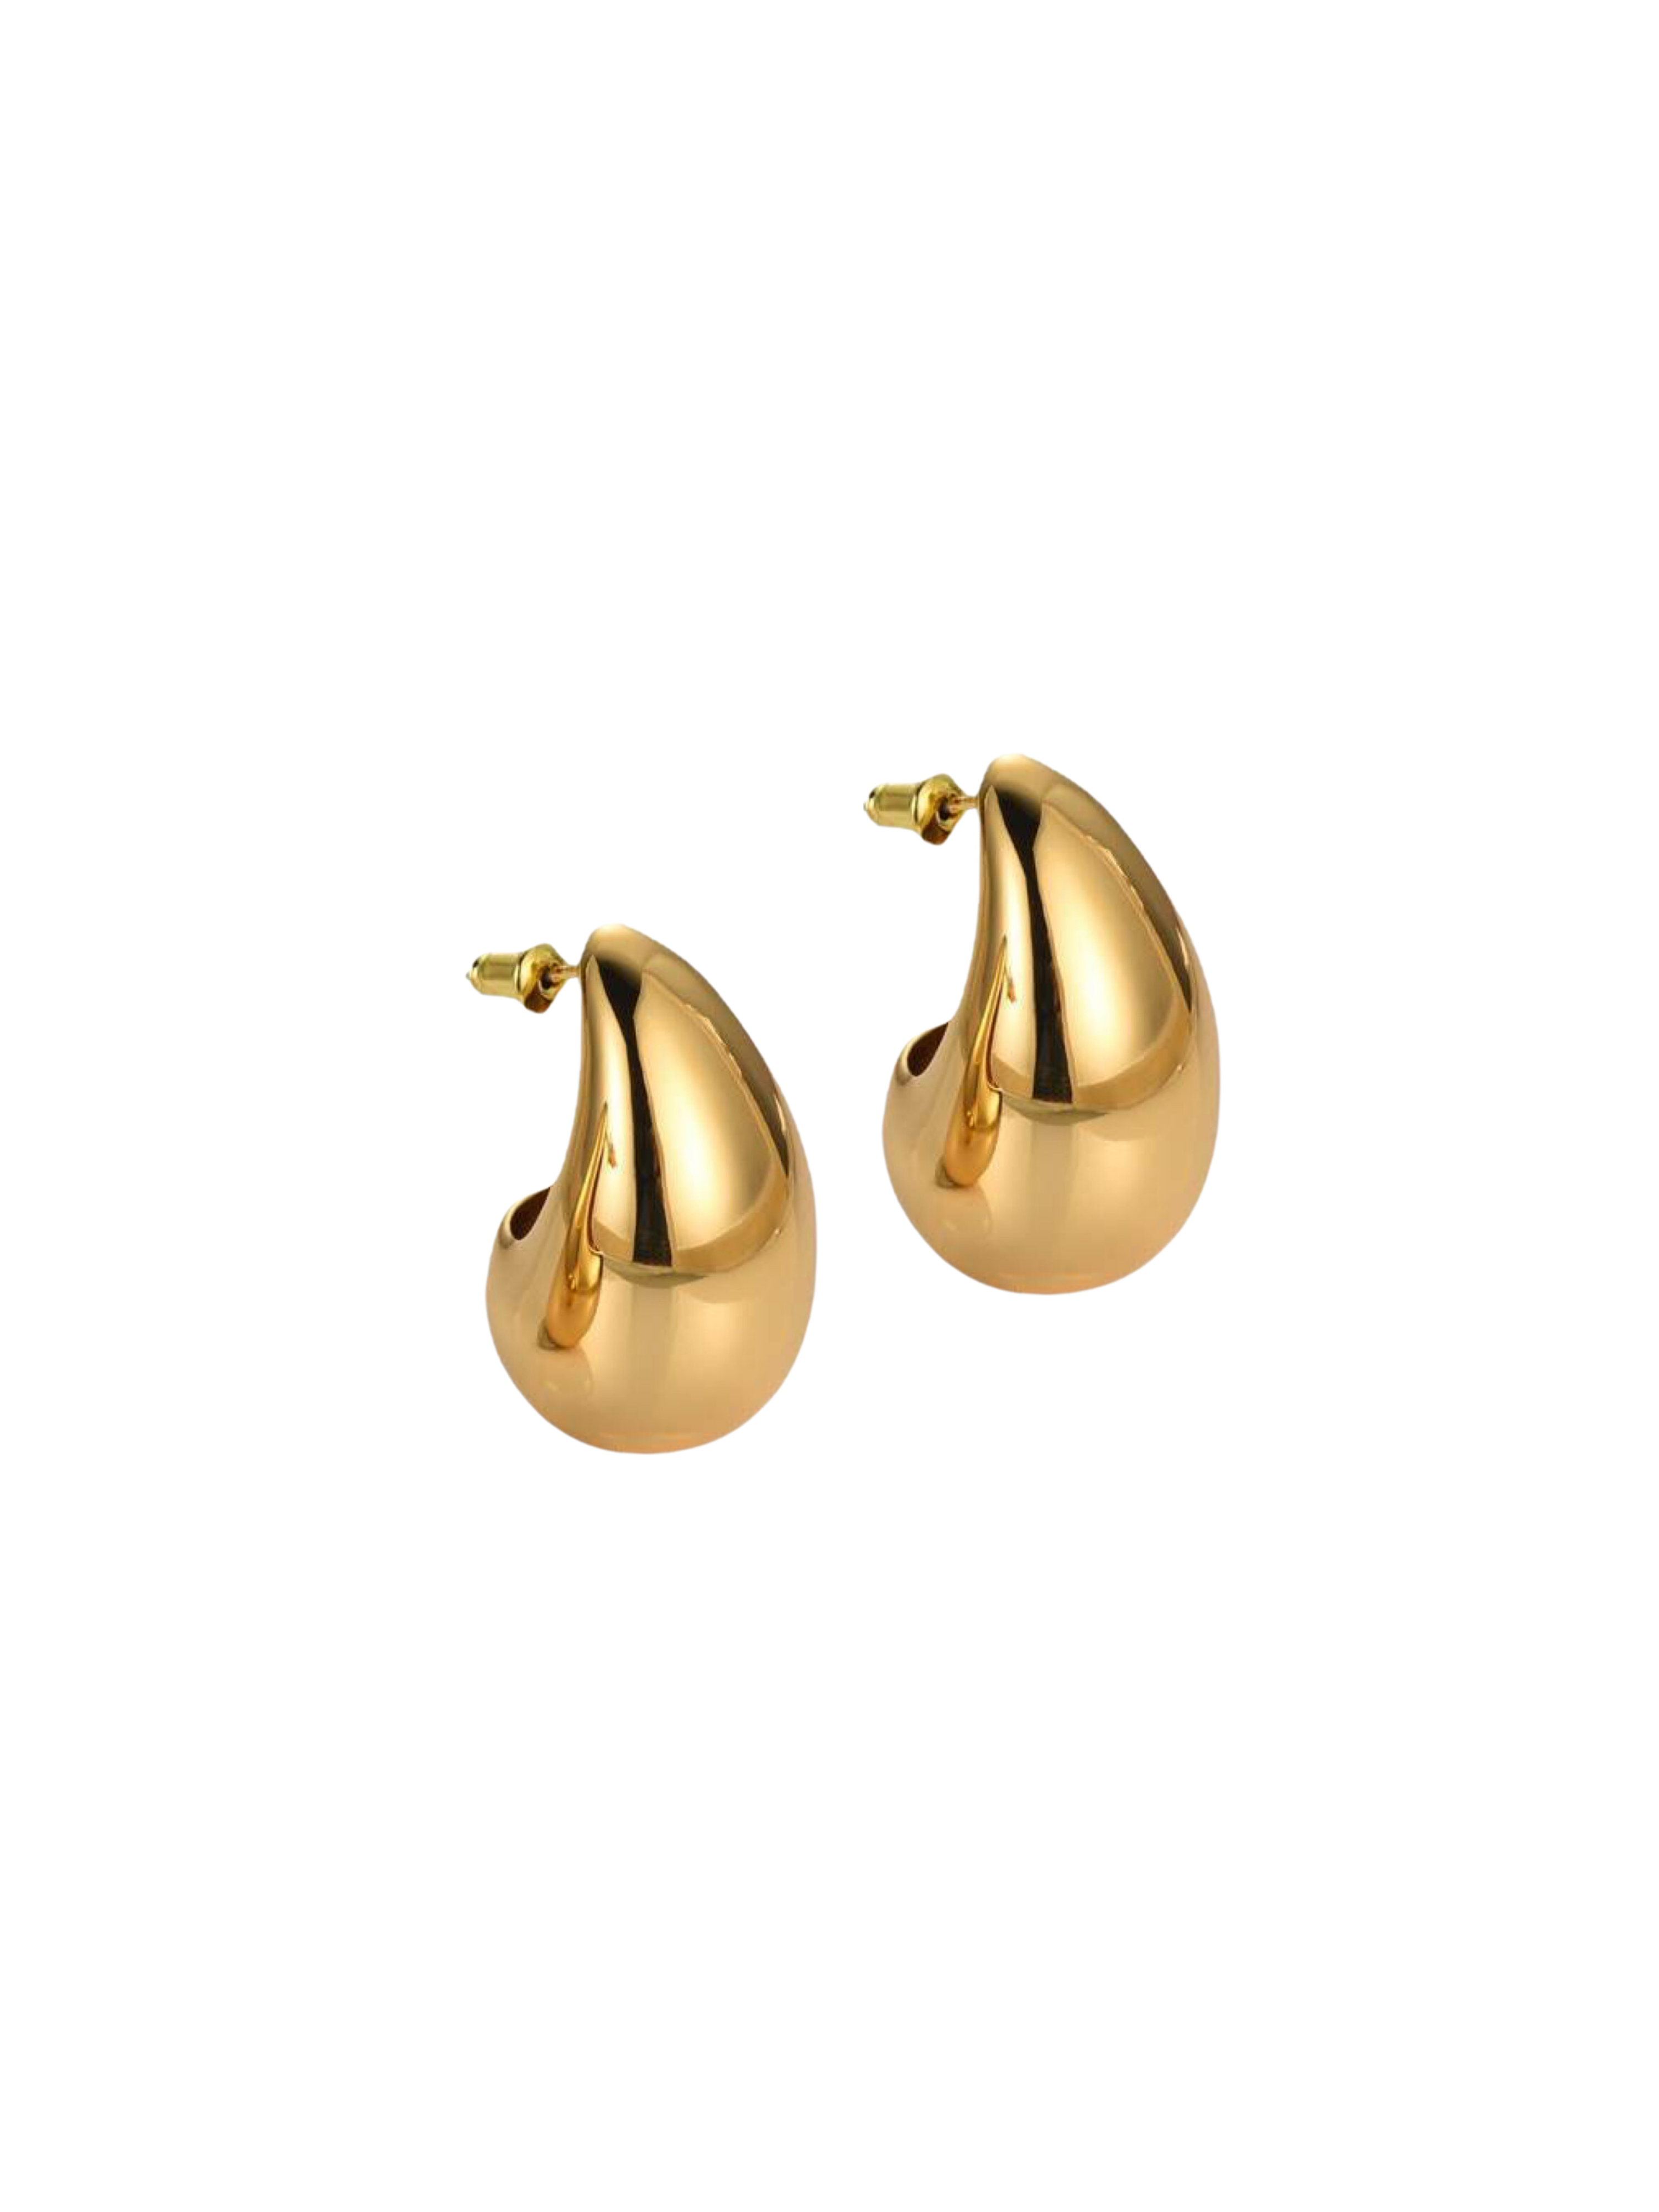 GOLDxTEAL gold plated chunky drop earrings.